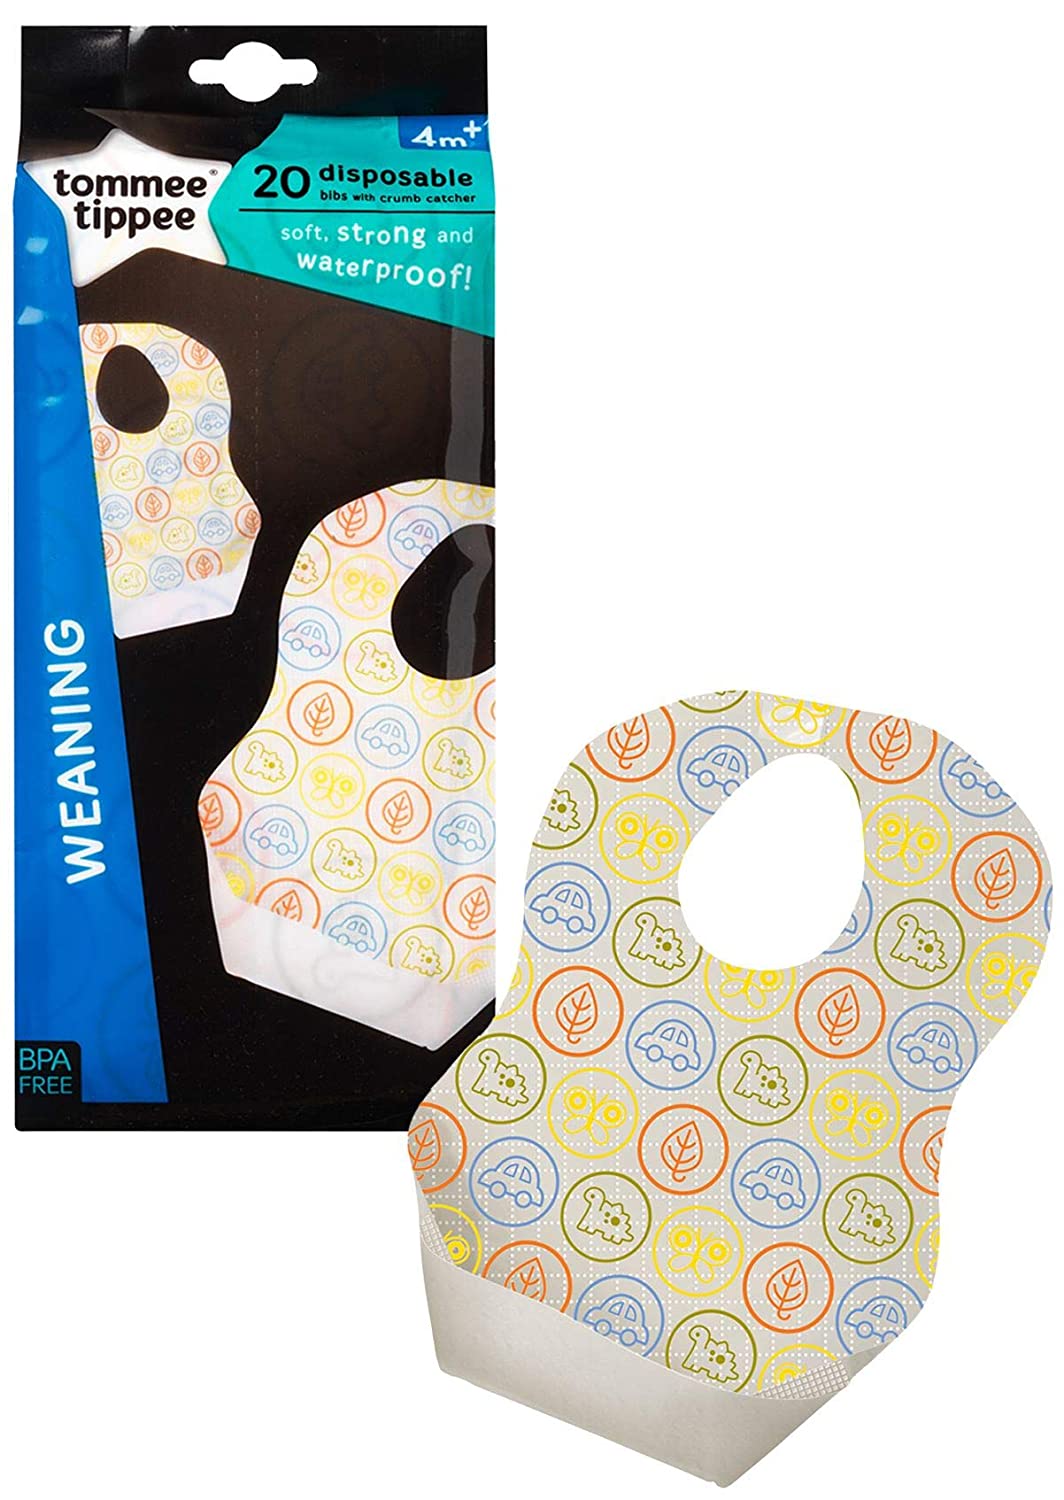 Tommee Tippee Explora Disposable Bibs x20